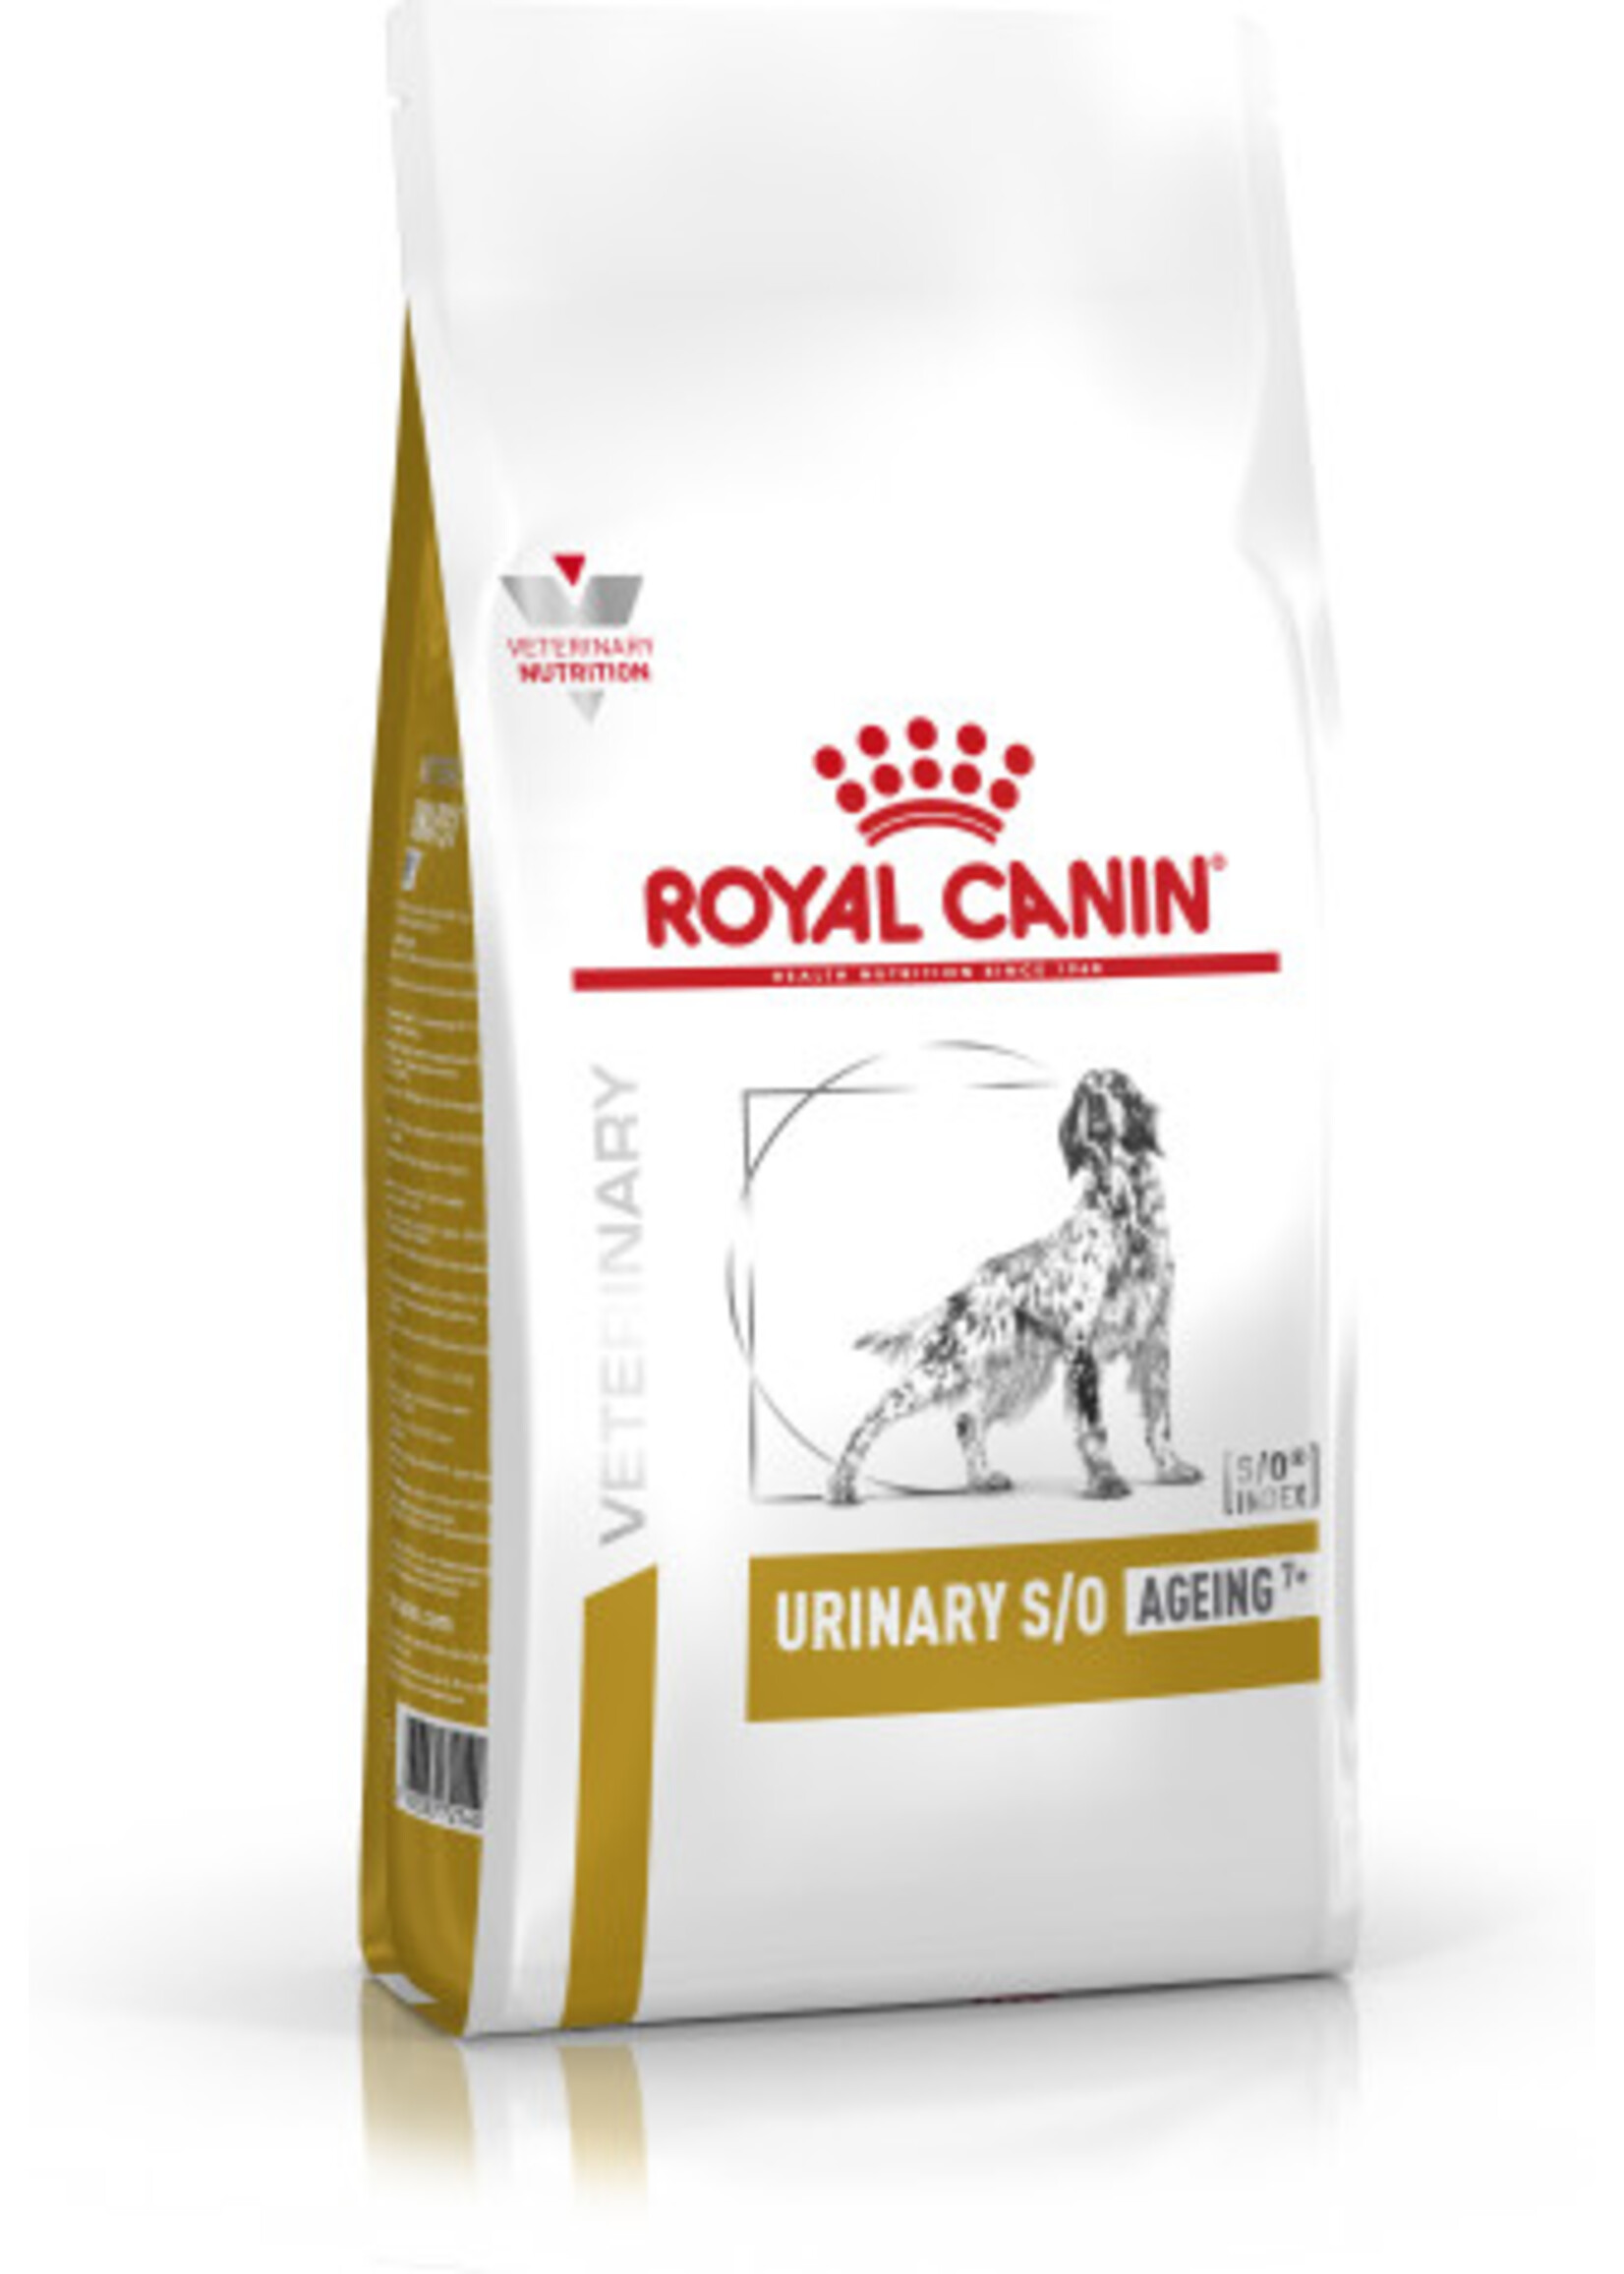 Royal Canin Royal Canin Urinary S/o Ageing Chien 1,5kg